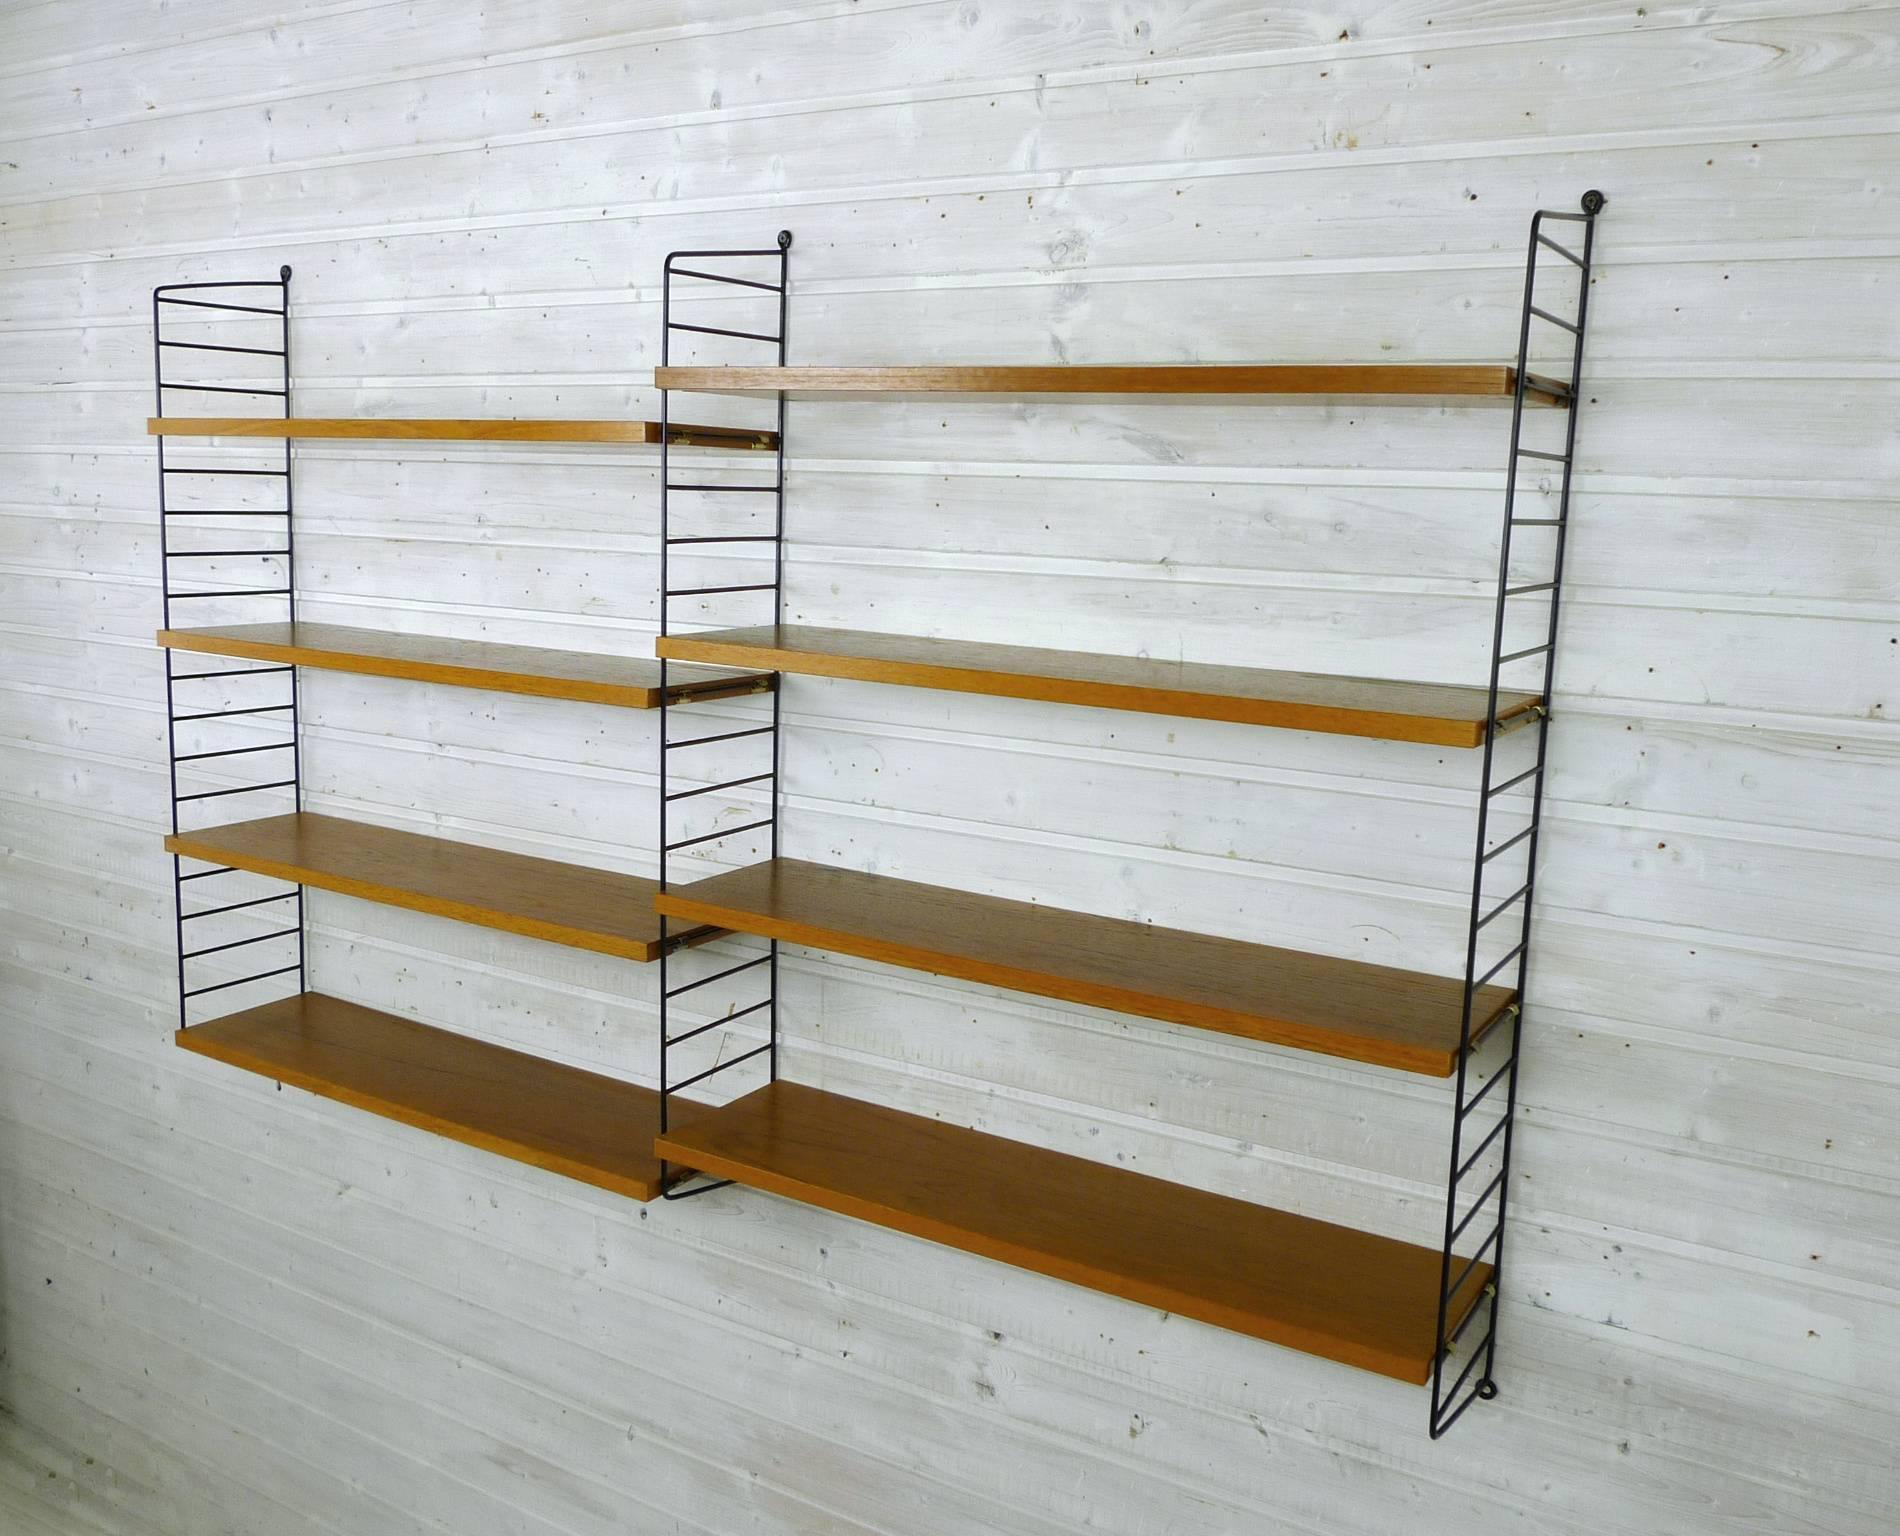 20th Century Swedish Wall Unit with Eight Teak Shelves by Nisse Strinning for String, 1950s